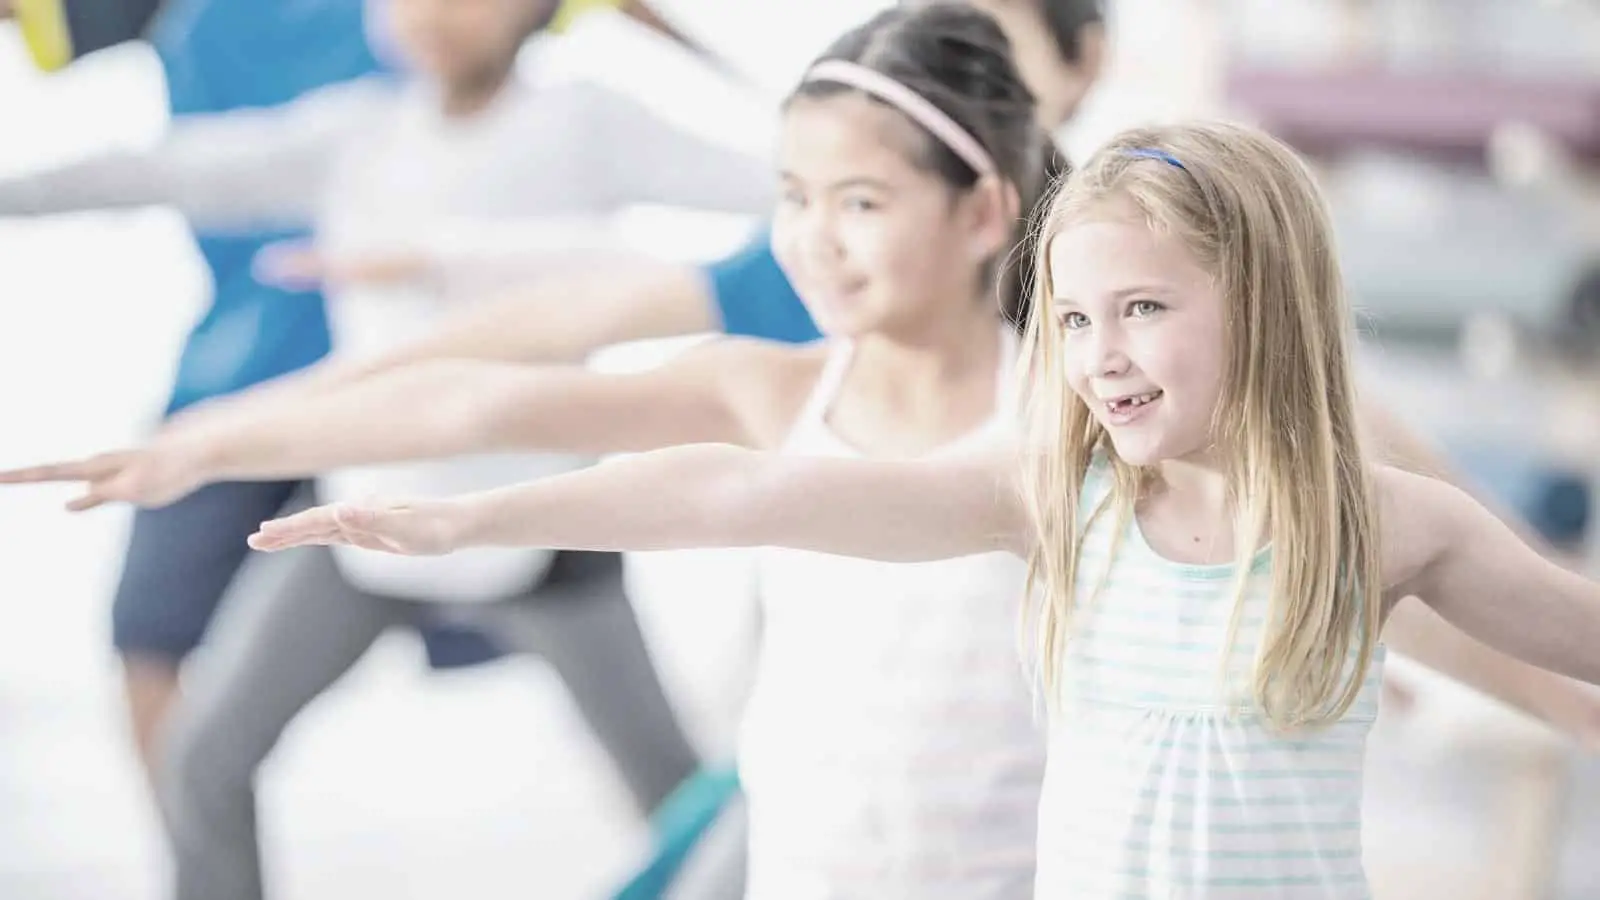 Kids yoga: when your child should start?